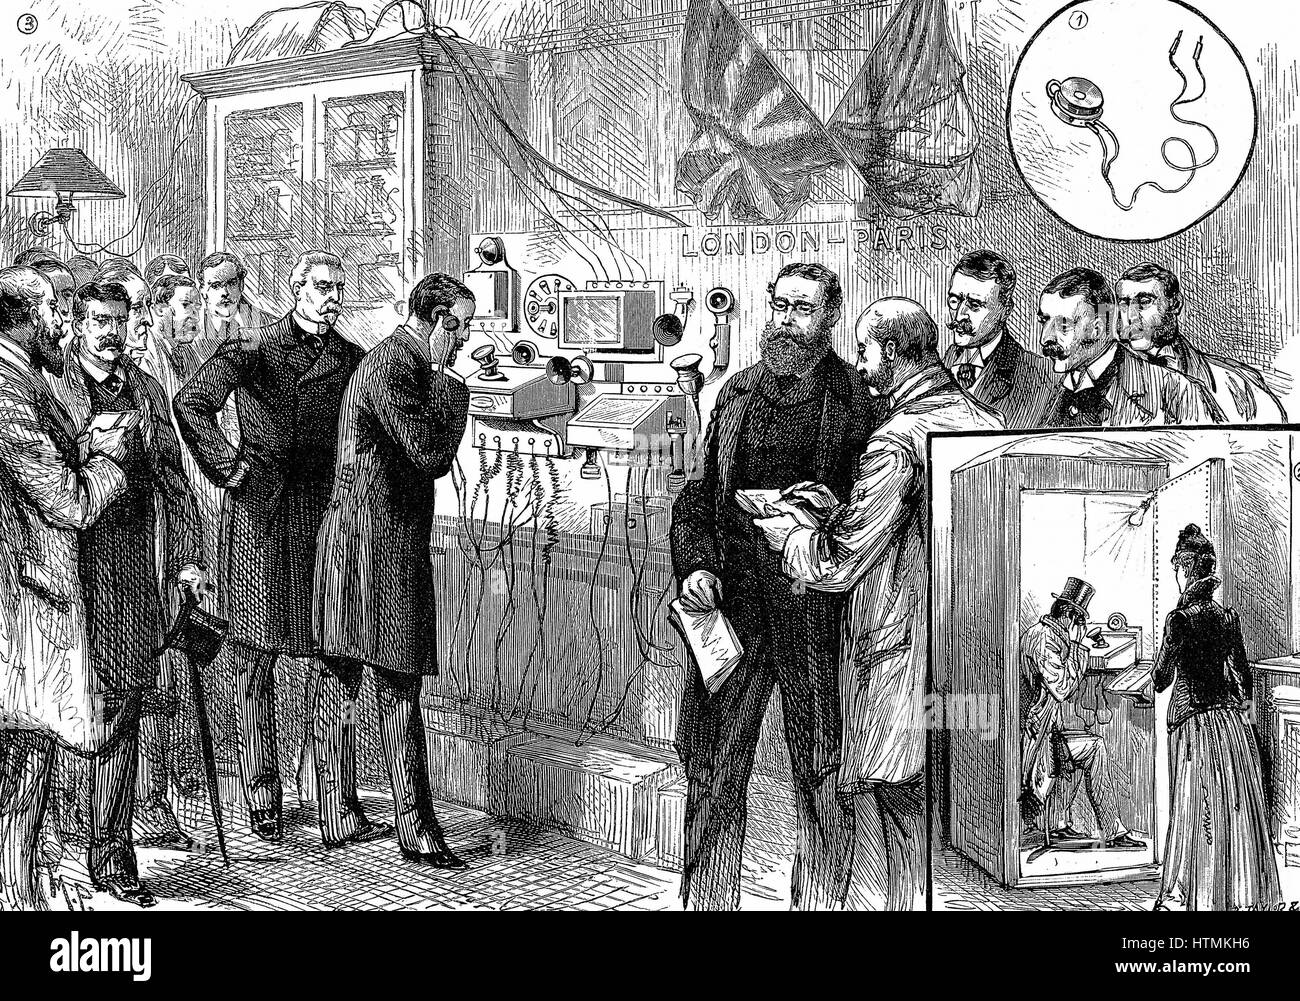 Opening of the Anglo-French telephone line. The first London to Paris telephone conversation at the General Post Office, London. Bell instruments were used at the London end. Wood engraving Paris 28 March 1891 Stock Photo